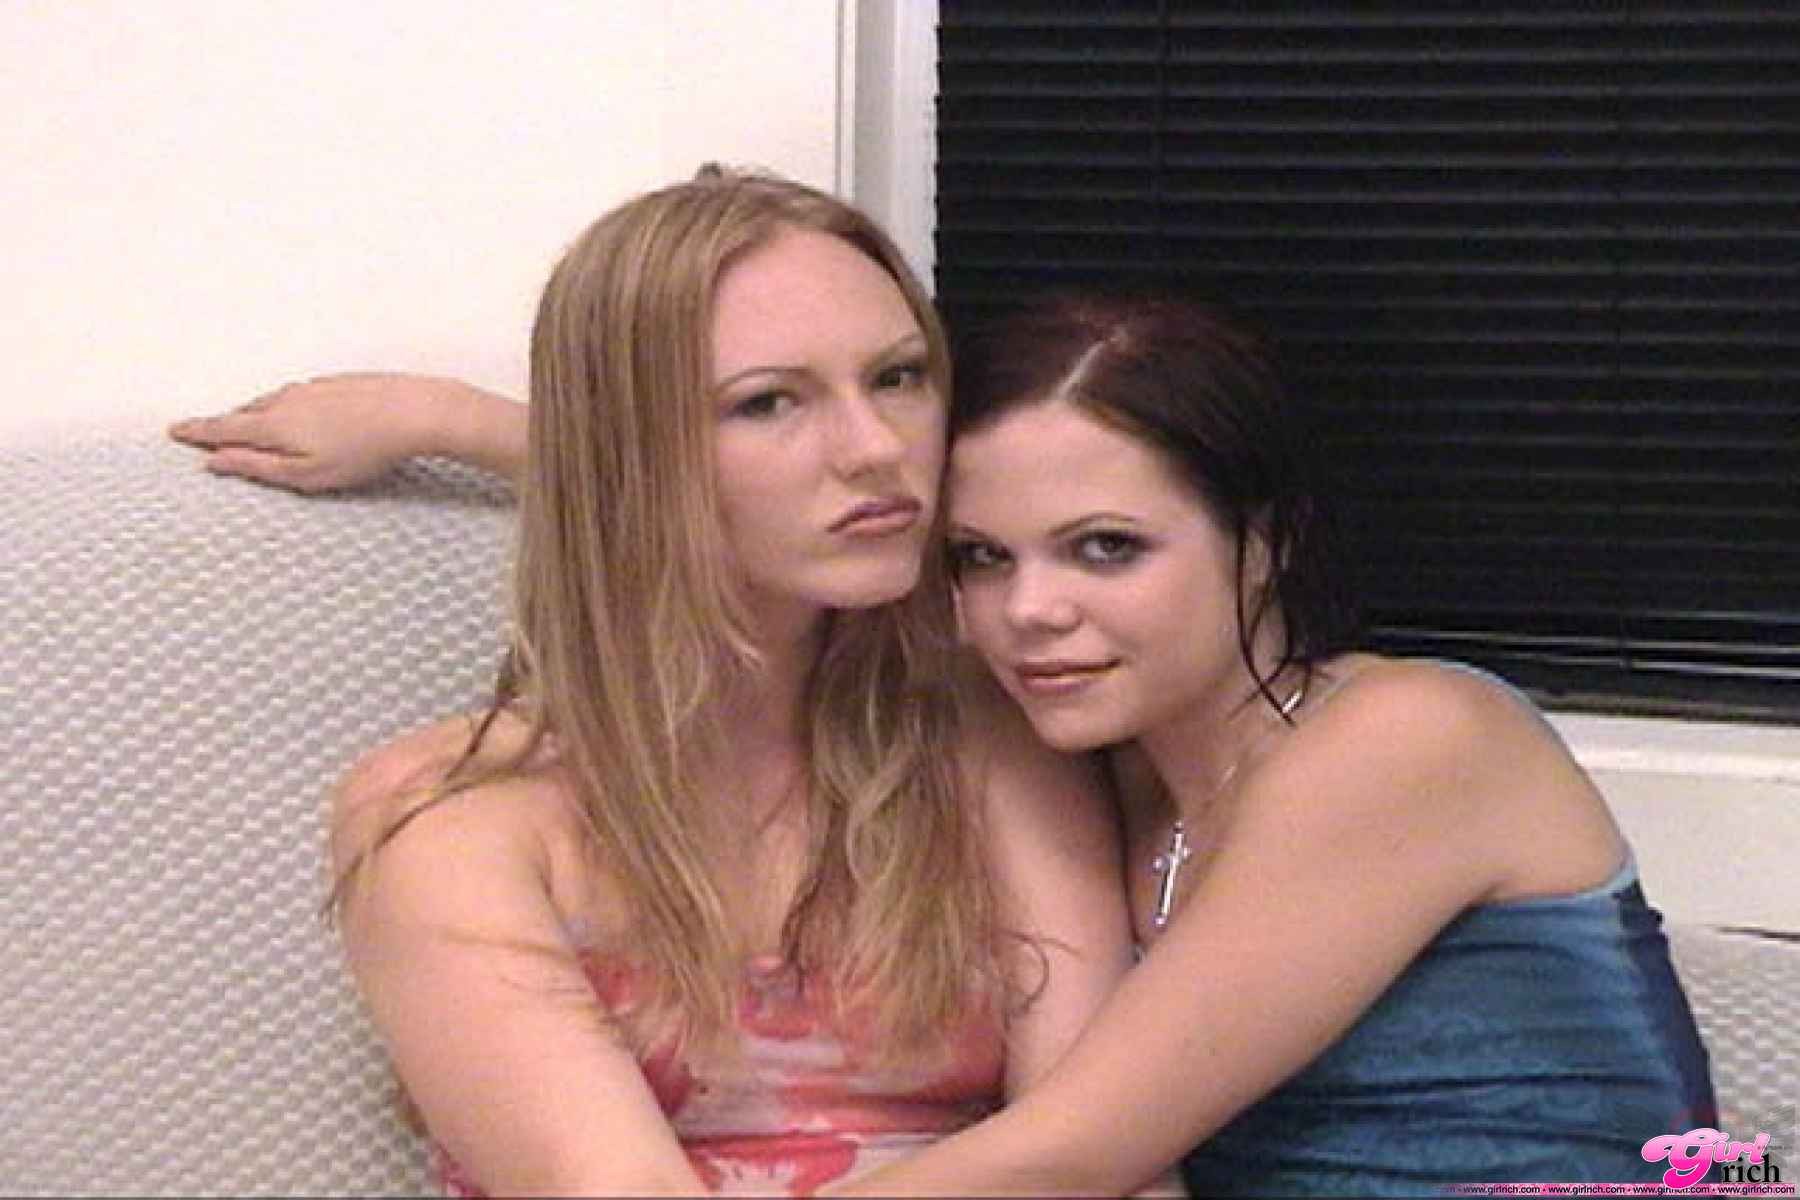 Candy and Cybil are freaks that like to fuck with strap ons, hell yes, give her 